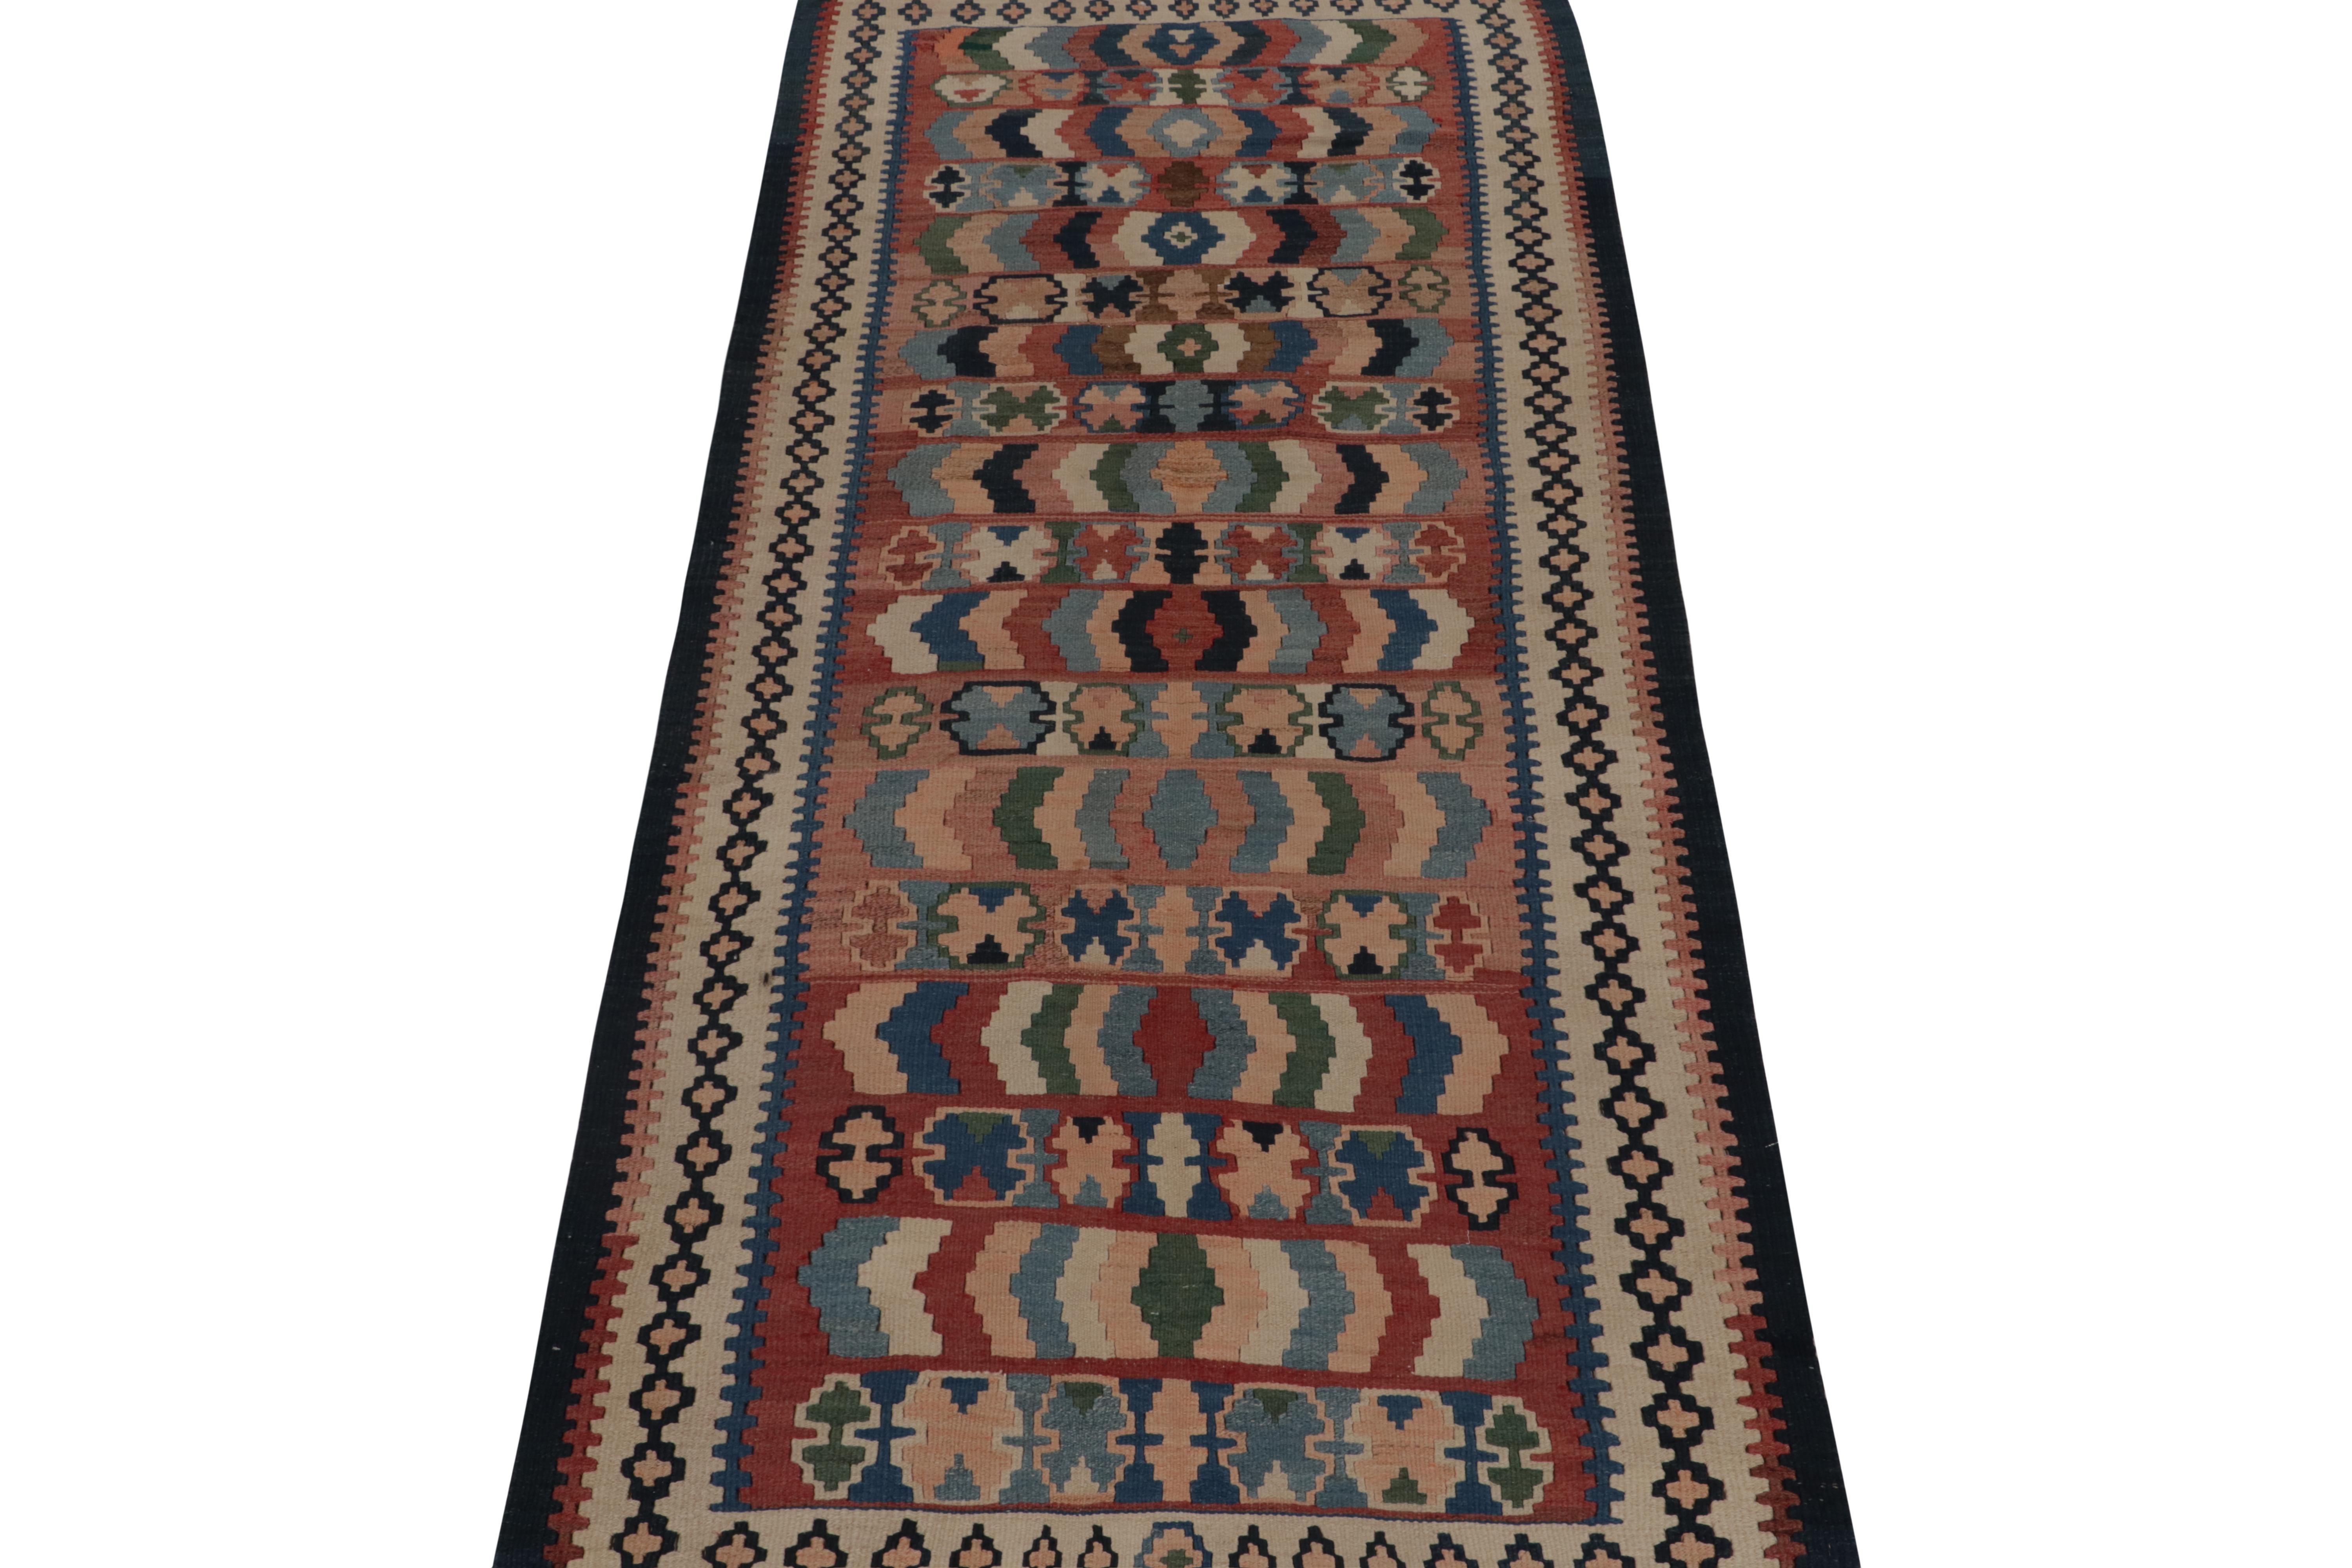 This vintage 4x10 Persian kilim is a mid-century gallery rug—handwoven in wool circa 1950-1960.

Further on the Design:

The intricate design enjoys a polychromatic colorway with rippling geometric patterns, gorgeous to behold in these